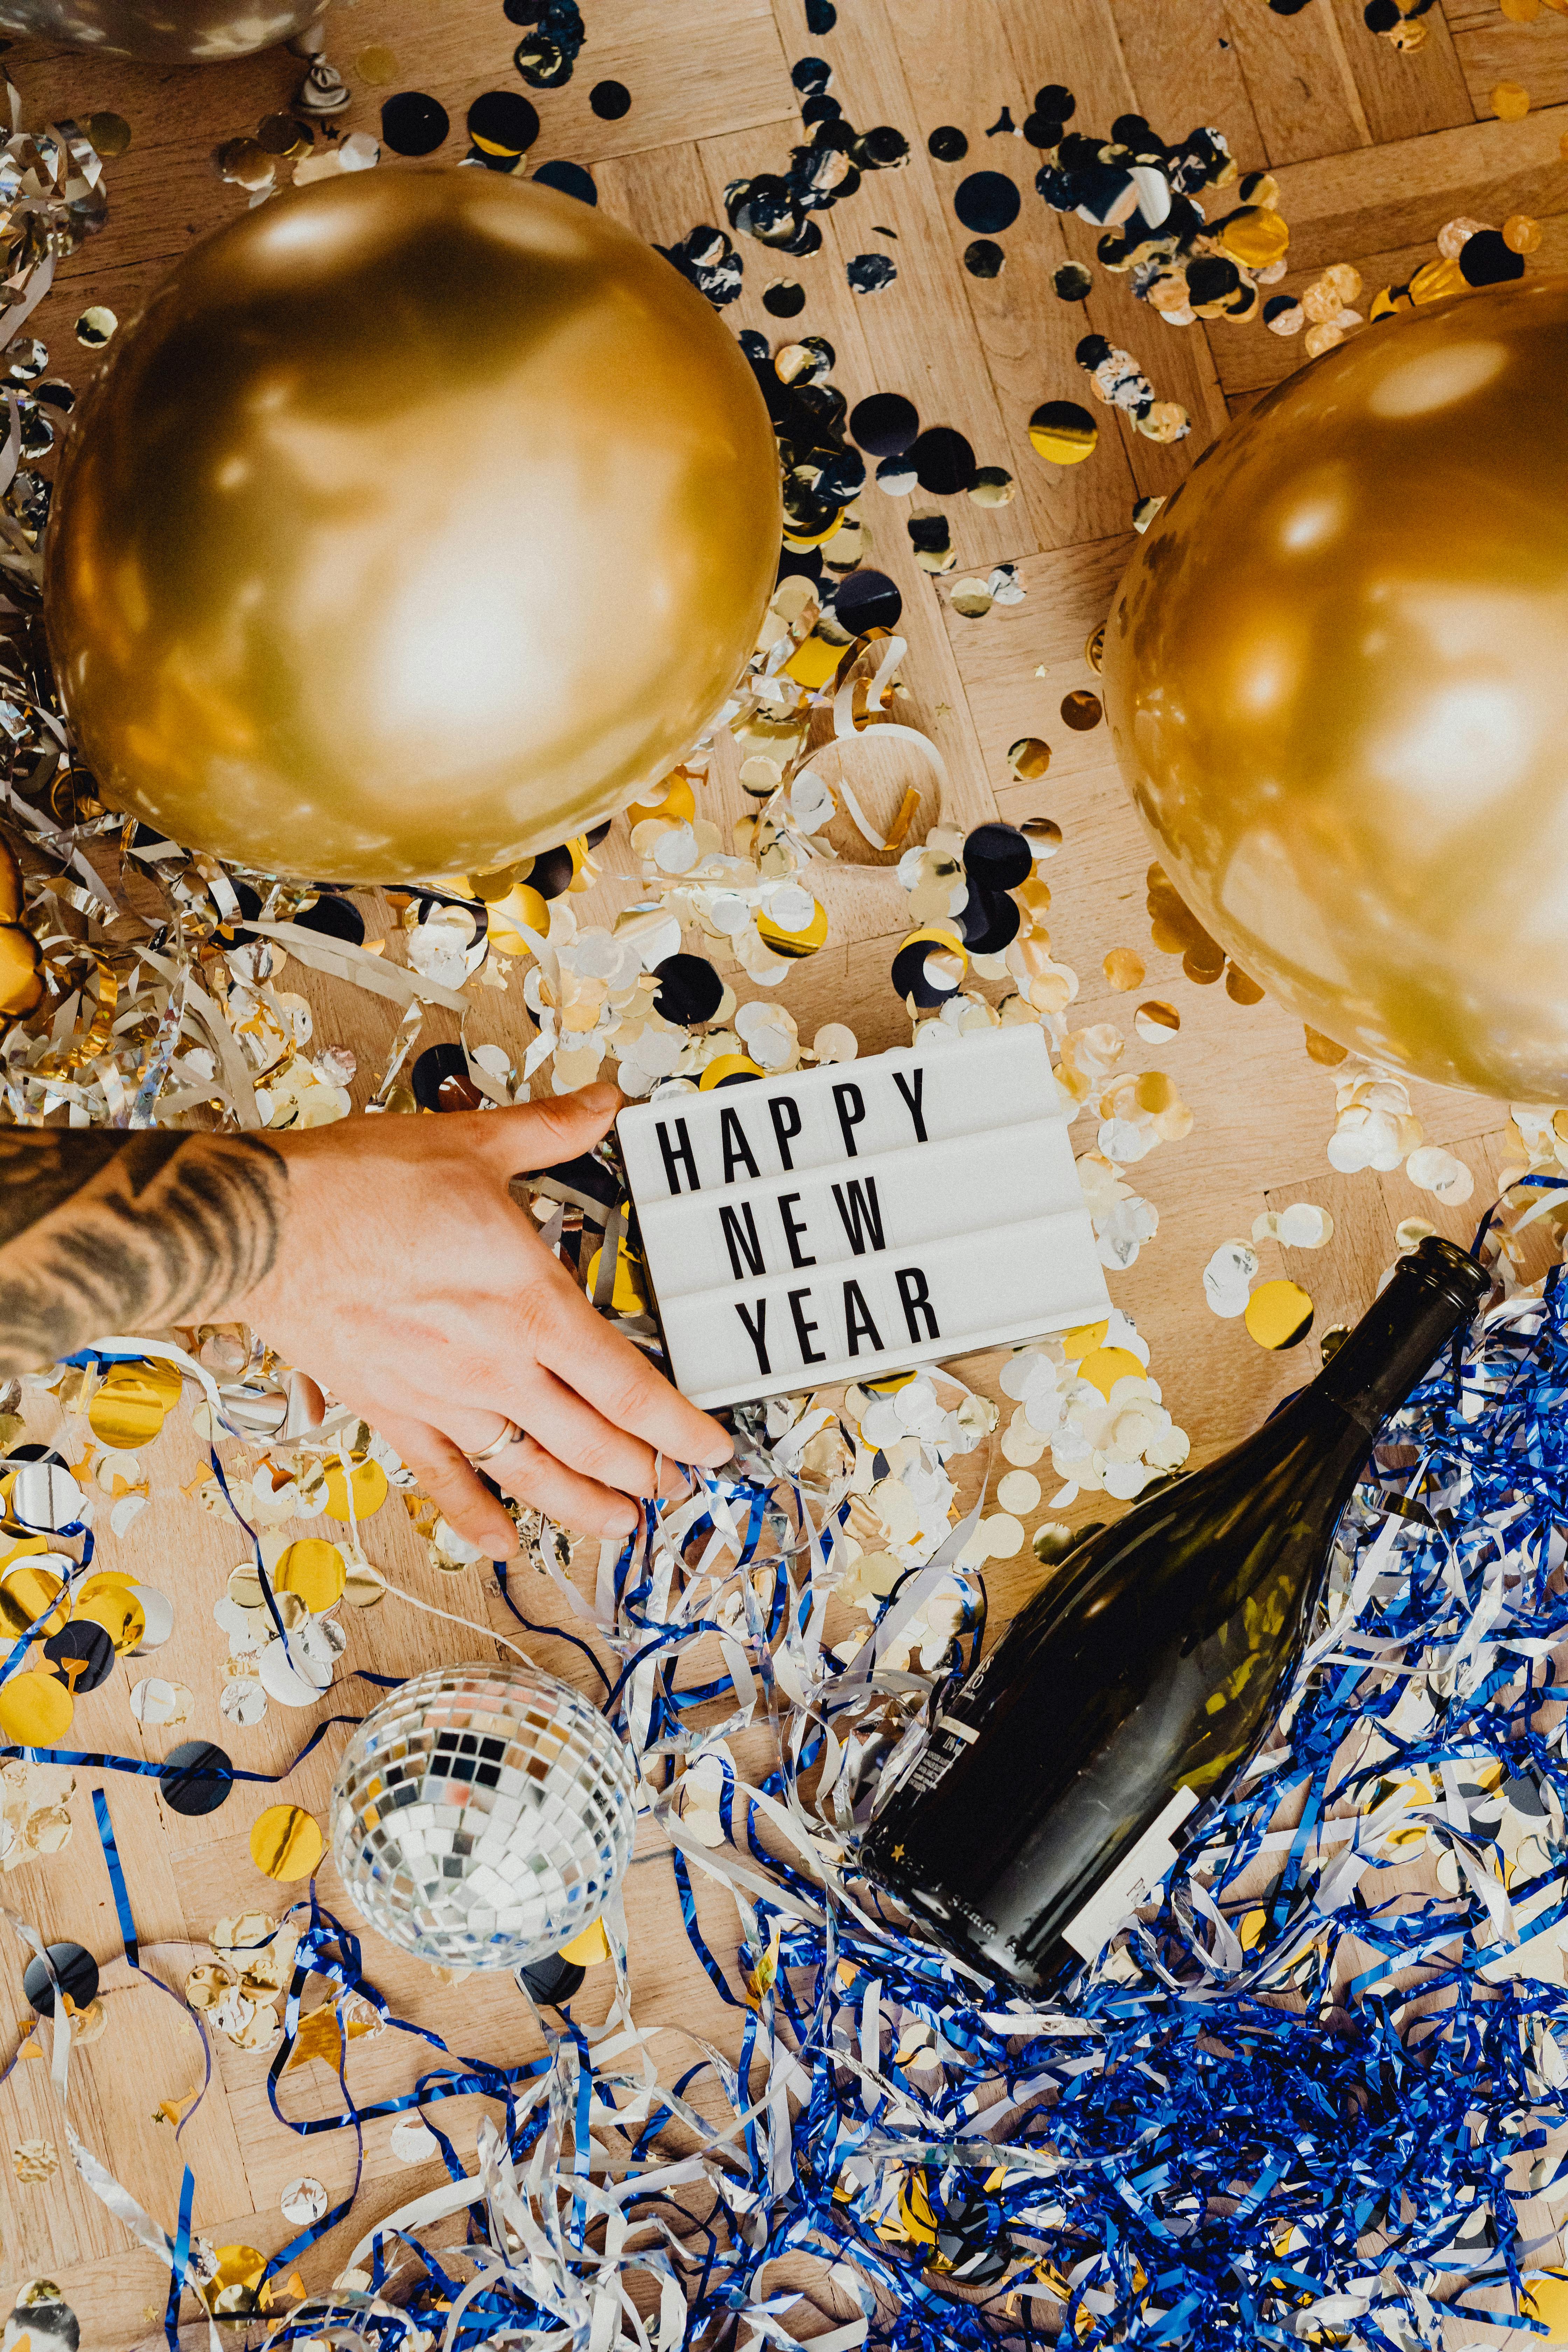 Happy New Year Photos, Download The BEST Free Happy New Year Stock Photos &  HD Images